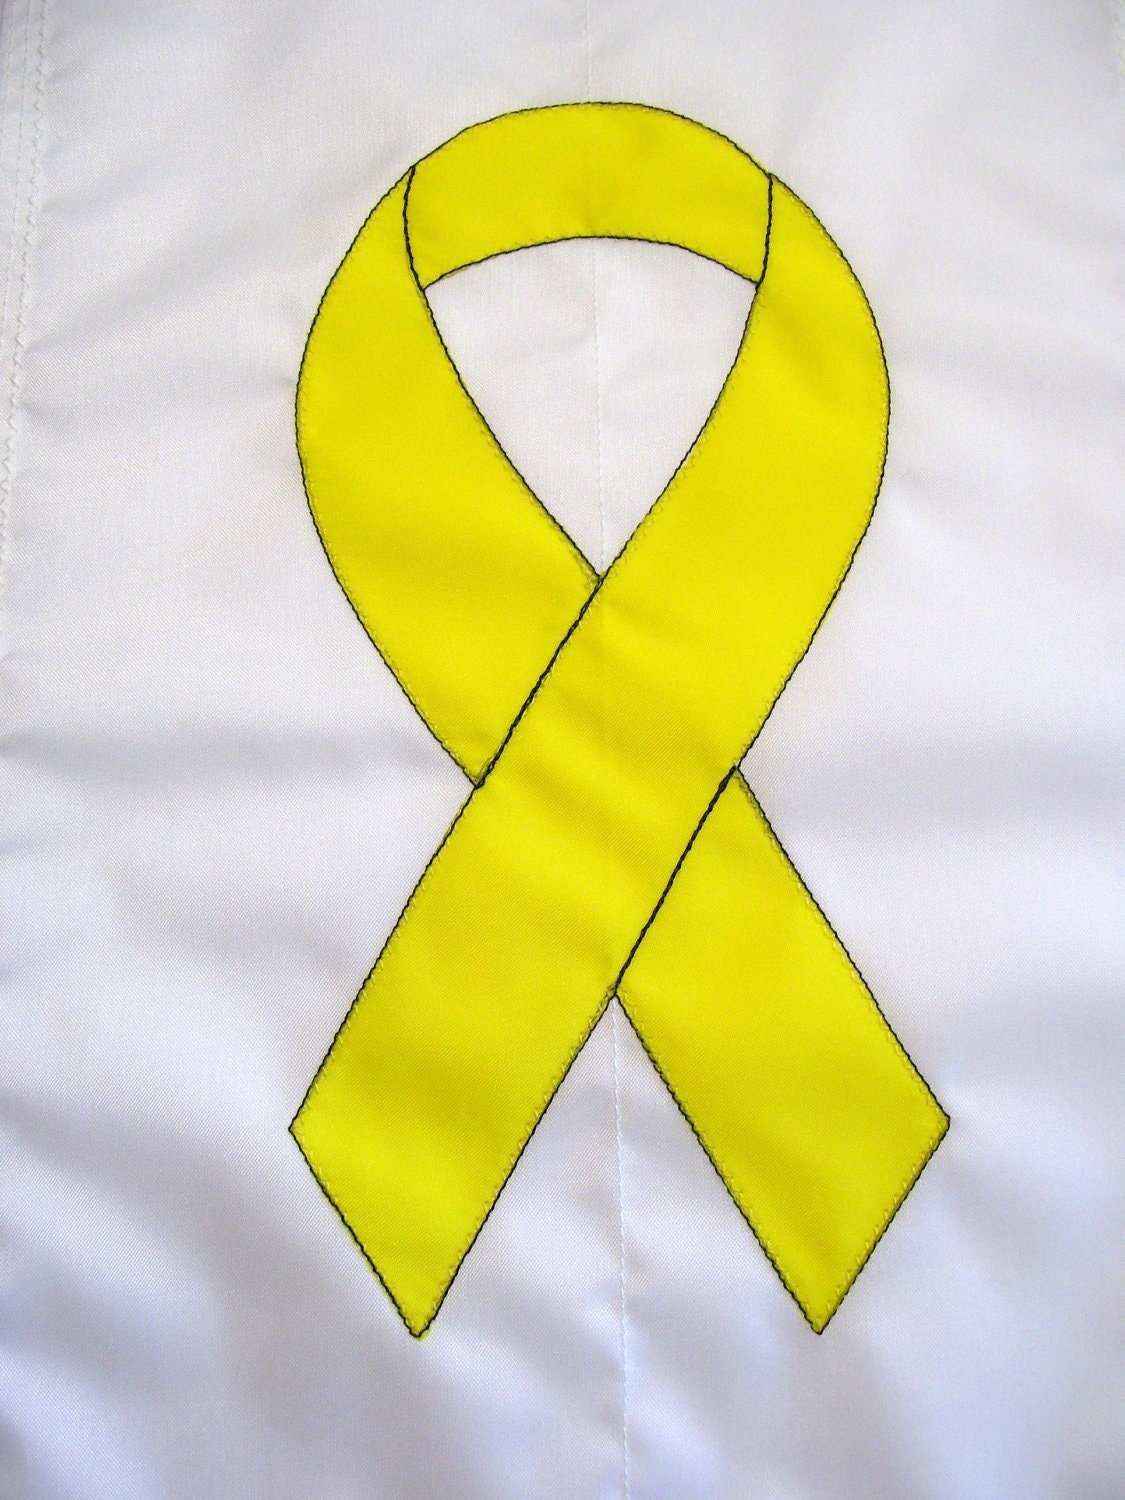 Yellow Ribbon Military Support 12 inch by 18 inch Garden Flag